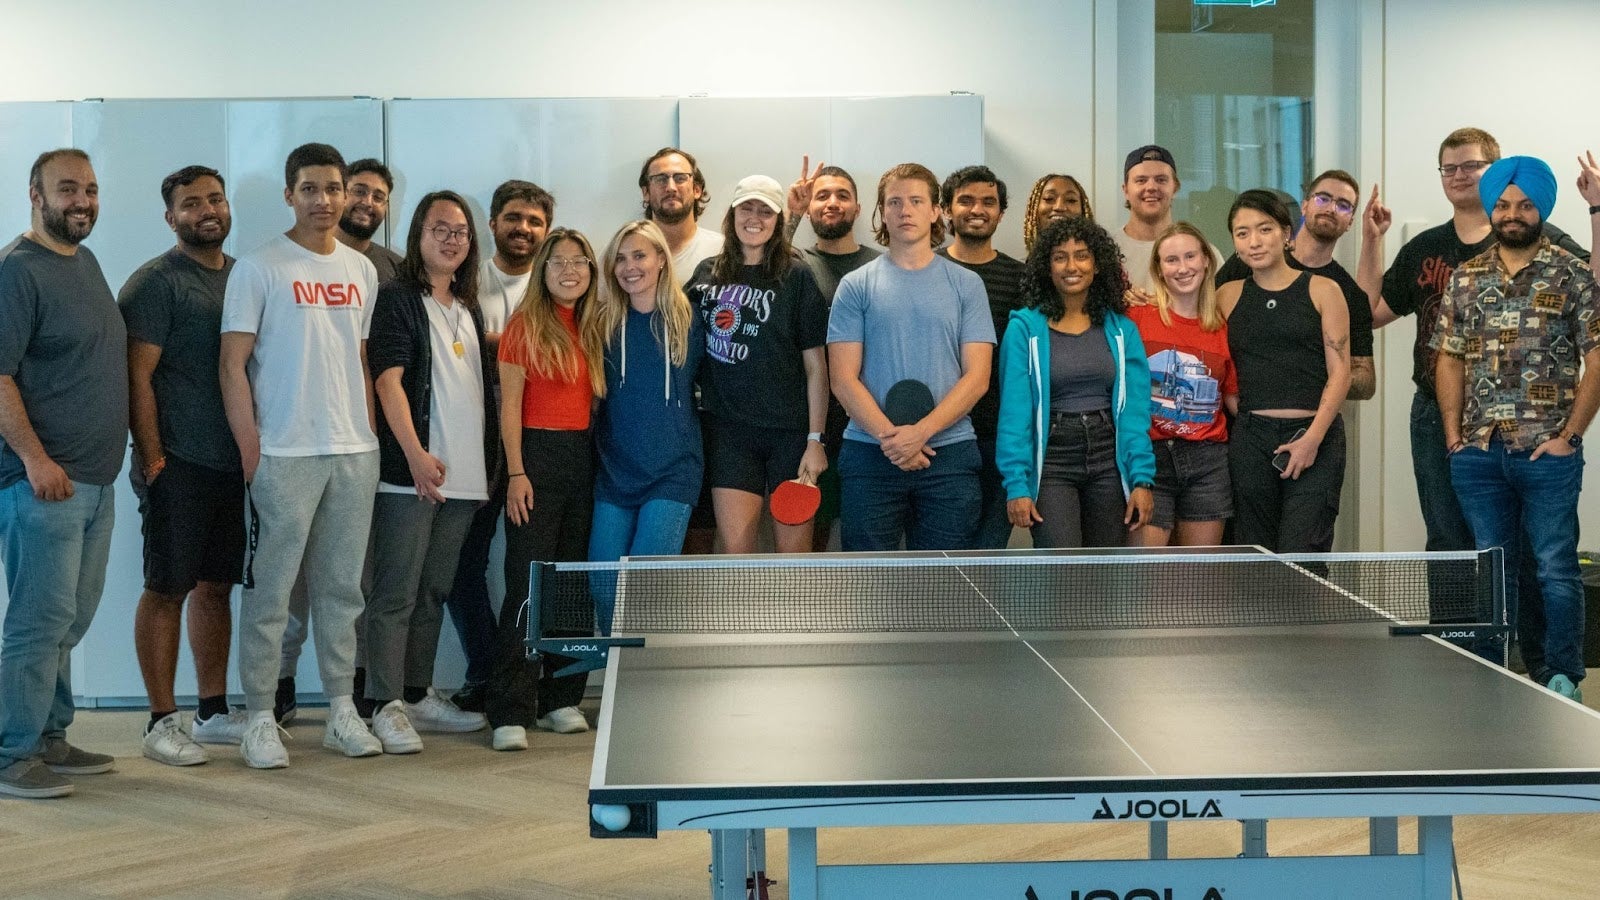 Perpetua employees and co-op students posing for a group photo in front of a ping pong table